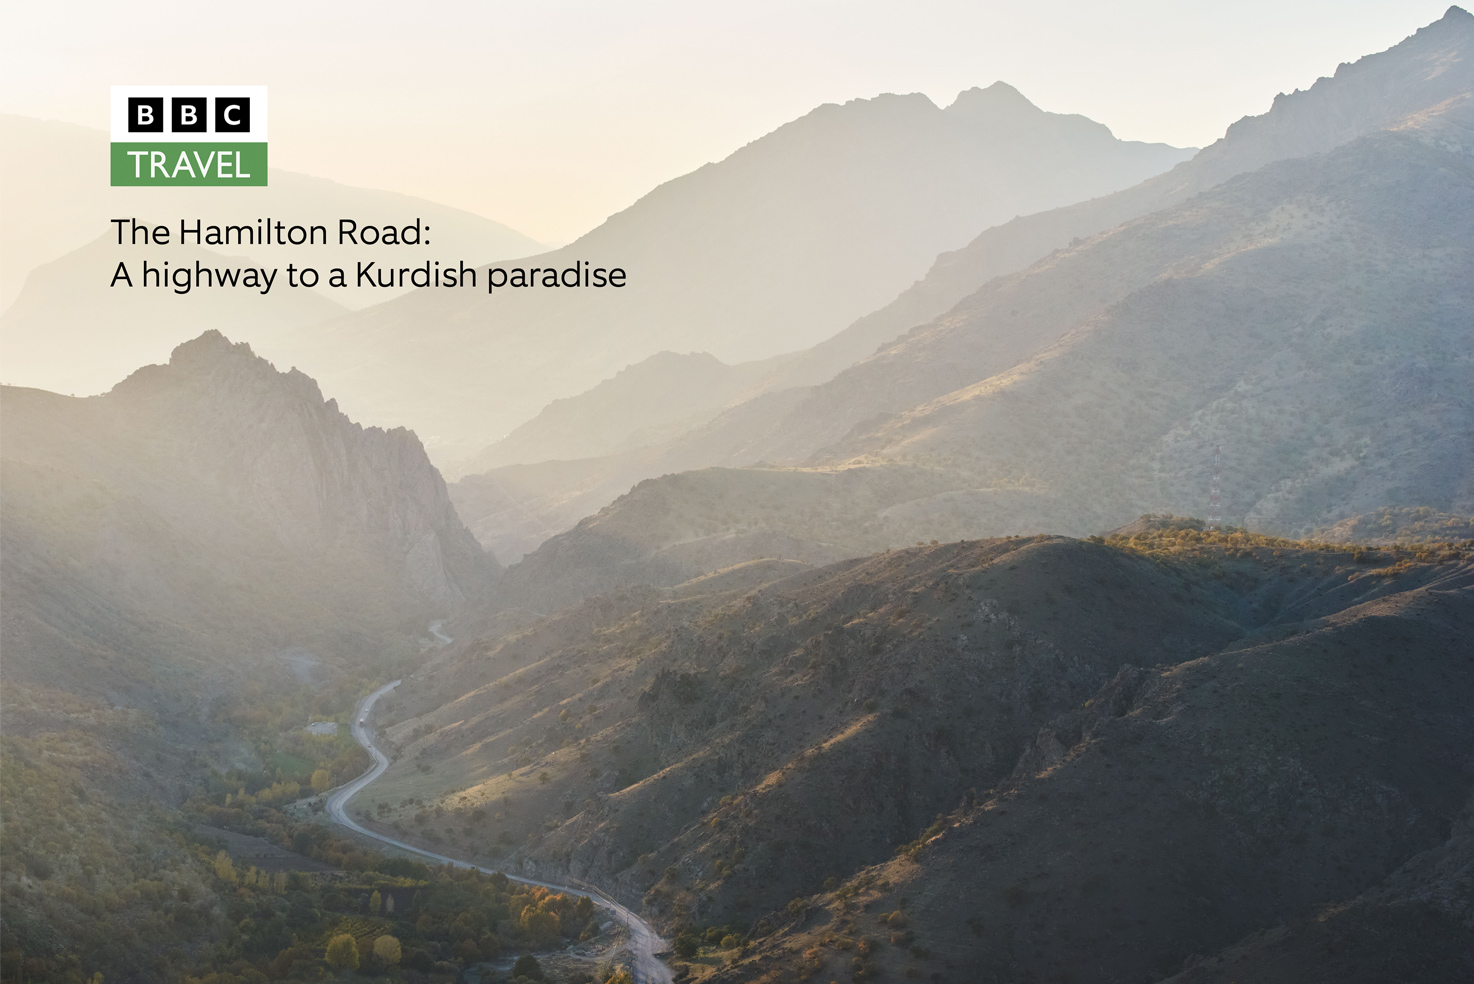 bbc-travel-published-article-about-the-hamilton-road-a-highway-to-kurdish-paradise-kurdistan-iraq-simon-urwin-travel-photography-and-writing